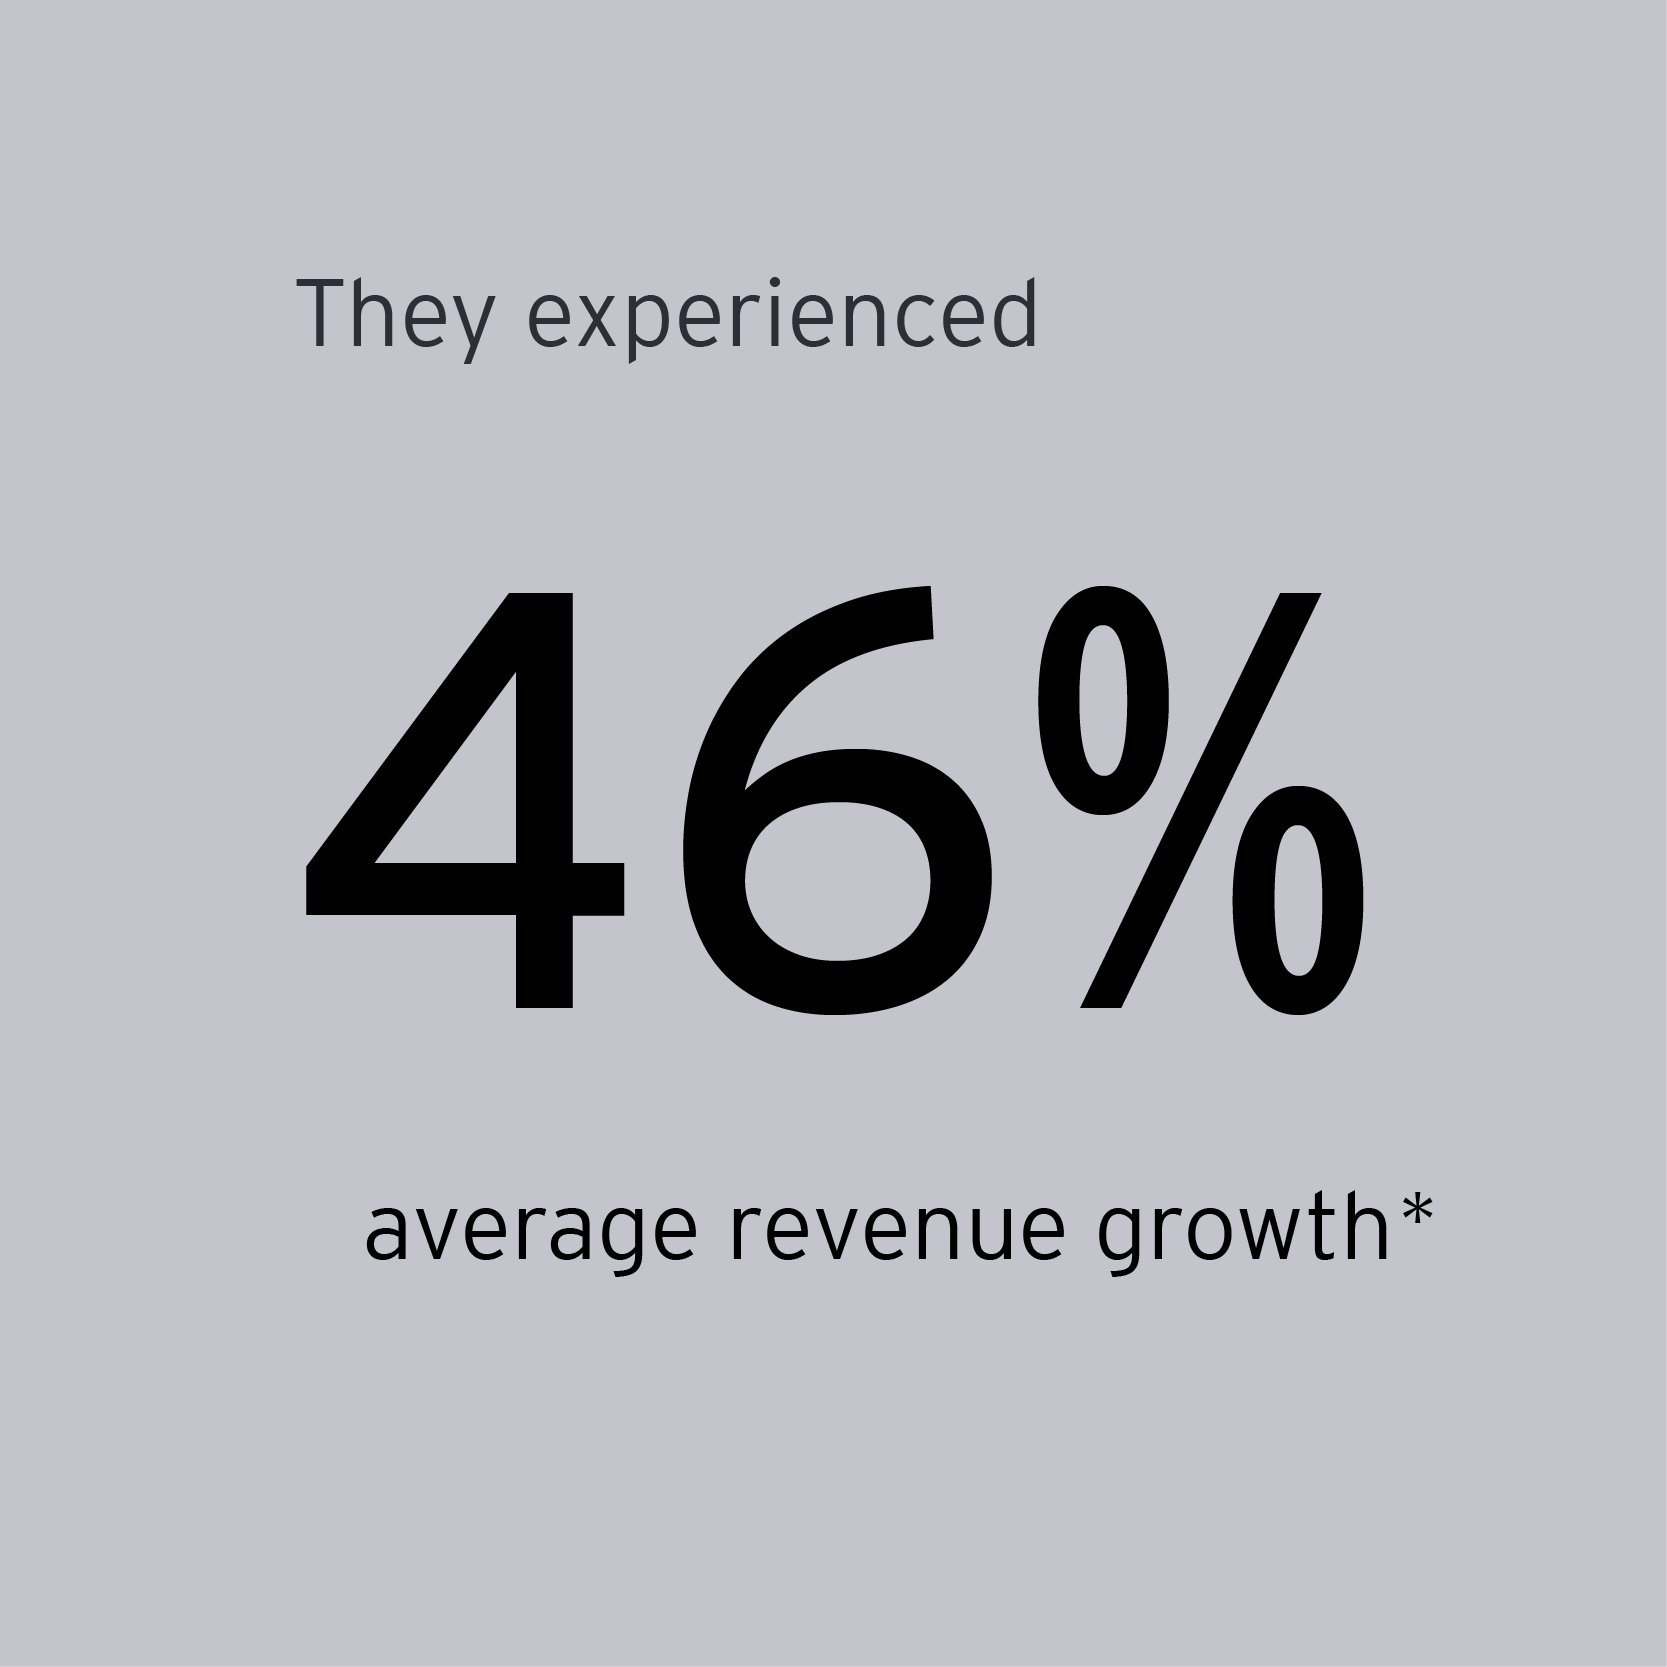 They experienced 46% average revenue growth